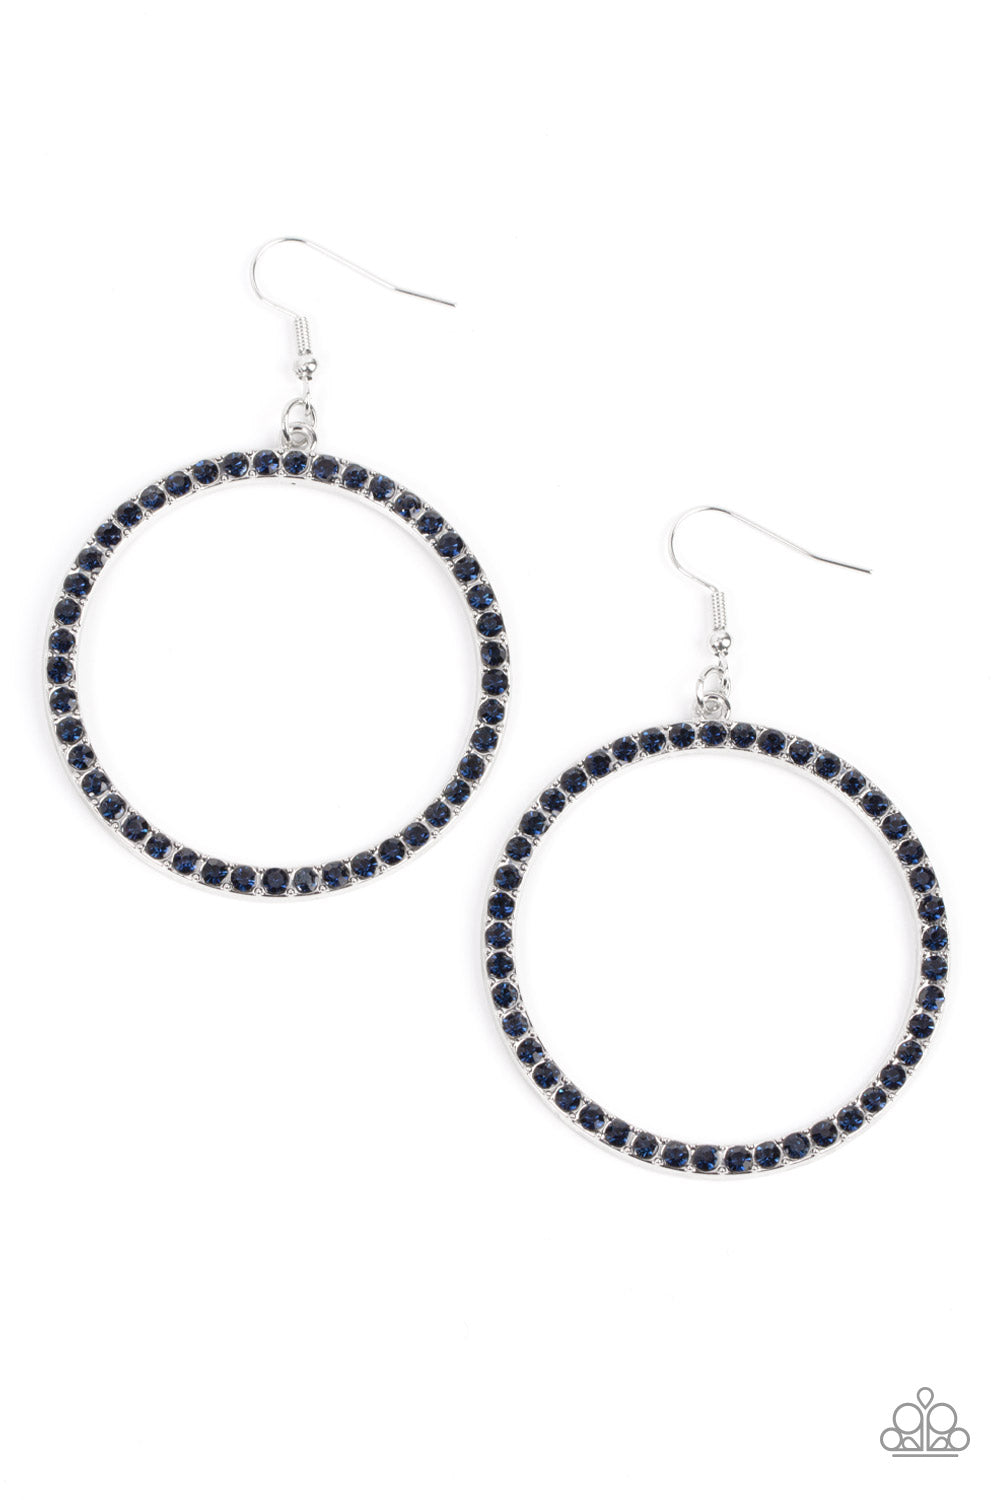 Head-Turning Halo Blue Earring - Paparazzi Accessories  The front of an oversized silver ring is encrusted in glitzy blue rhinestones, resulting in a head-turning hoop. Earring attaches to a standard fishhook fitting.  Sold as one pair of earrings.